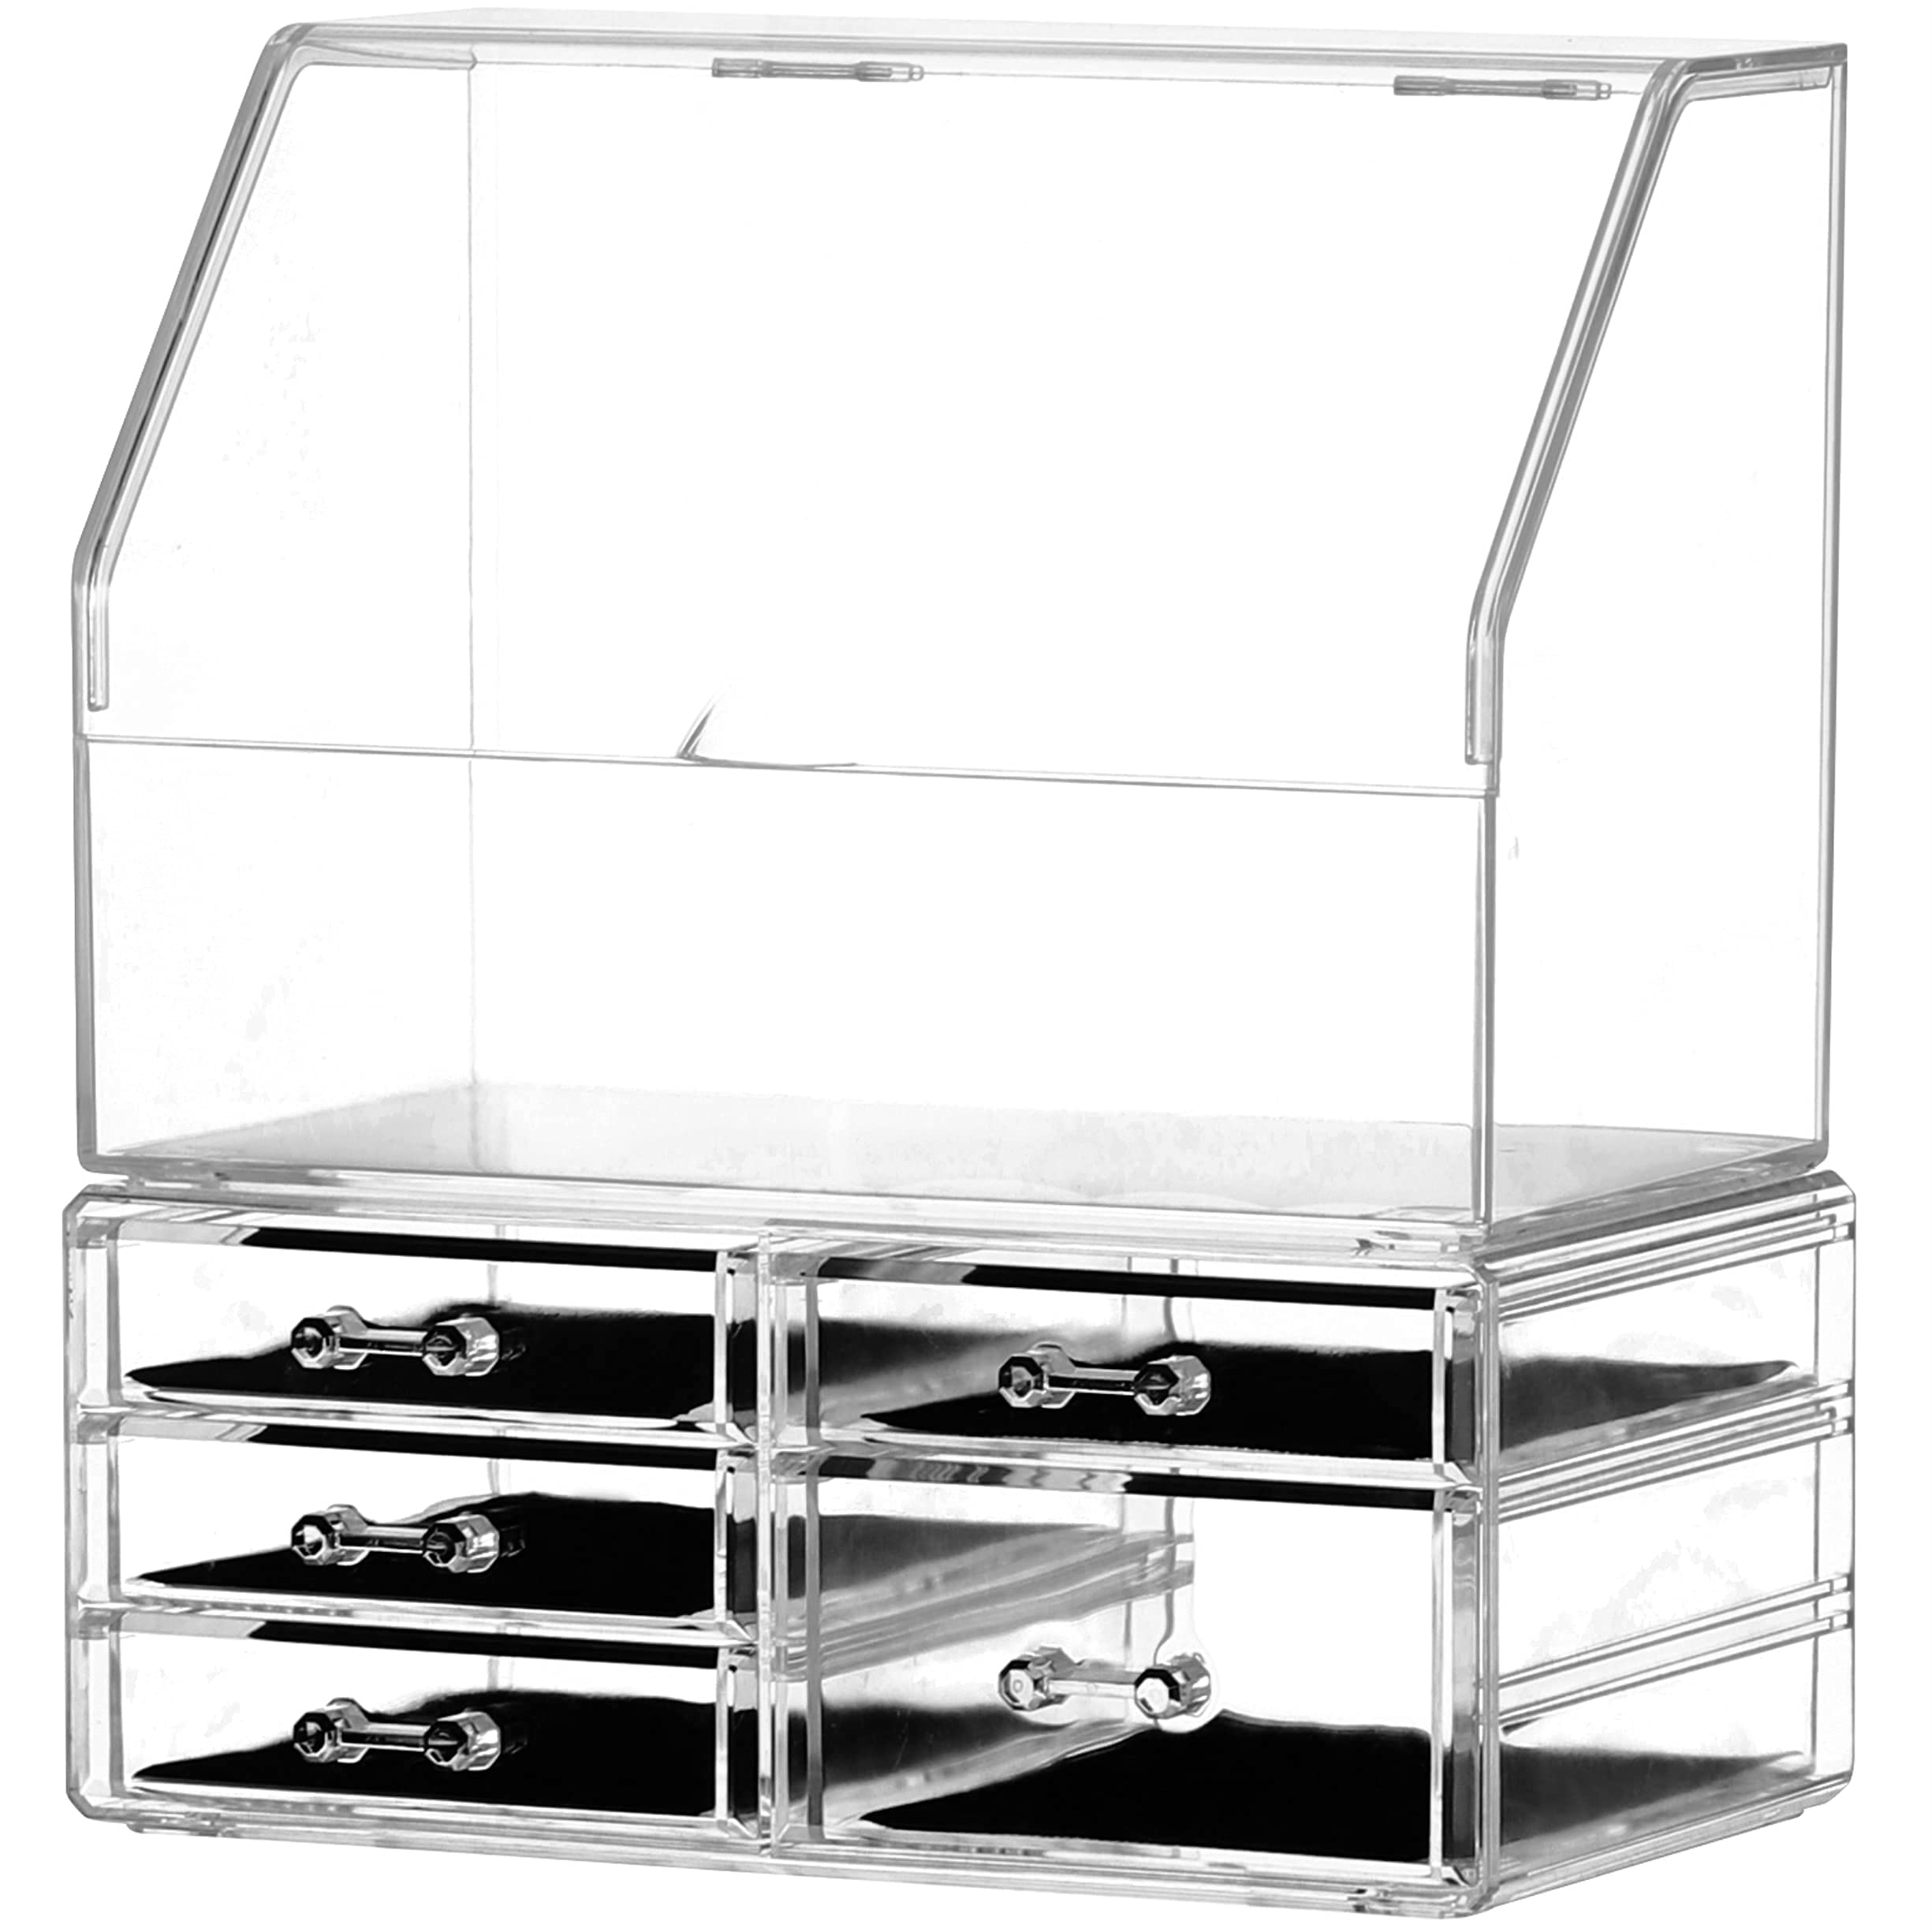 Stackable Makeup Organizer Storage Drawers, Tall Acrylic Bathroom